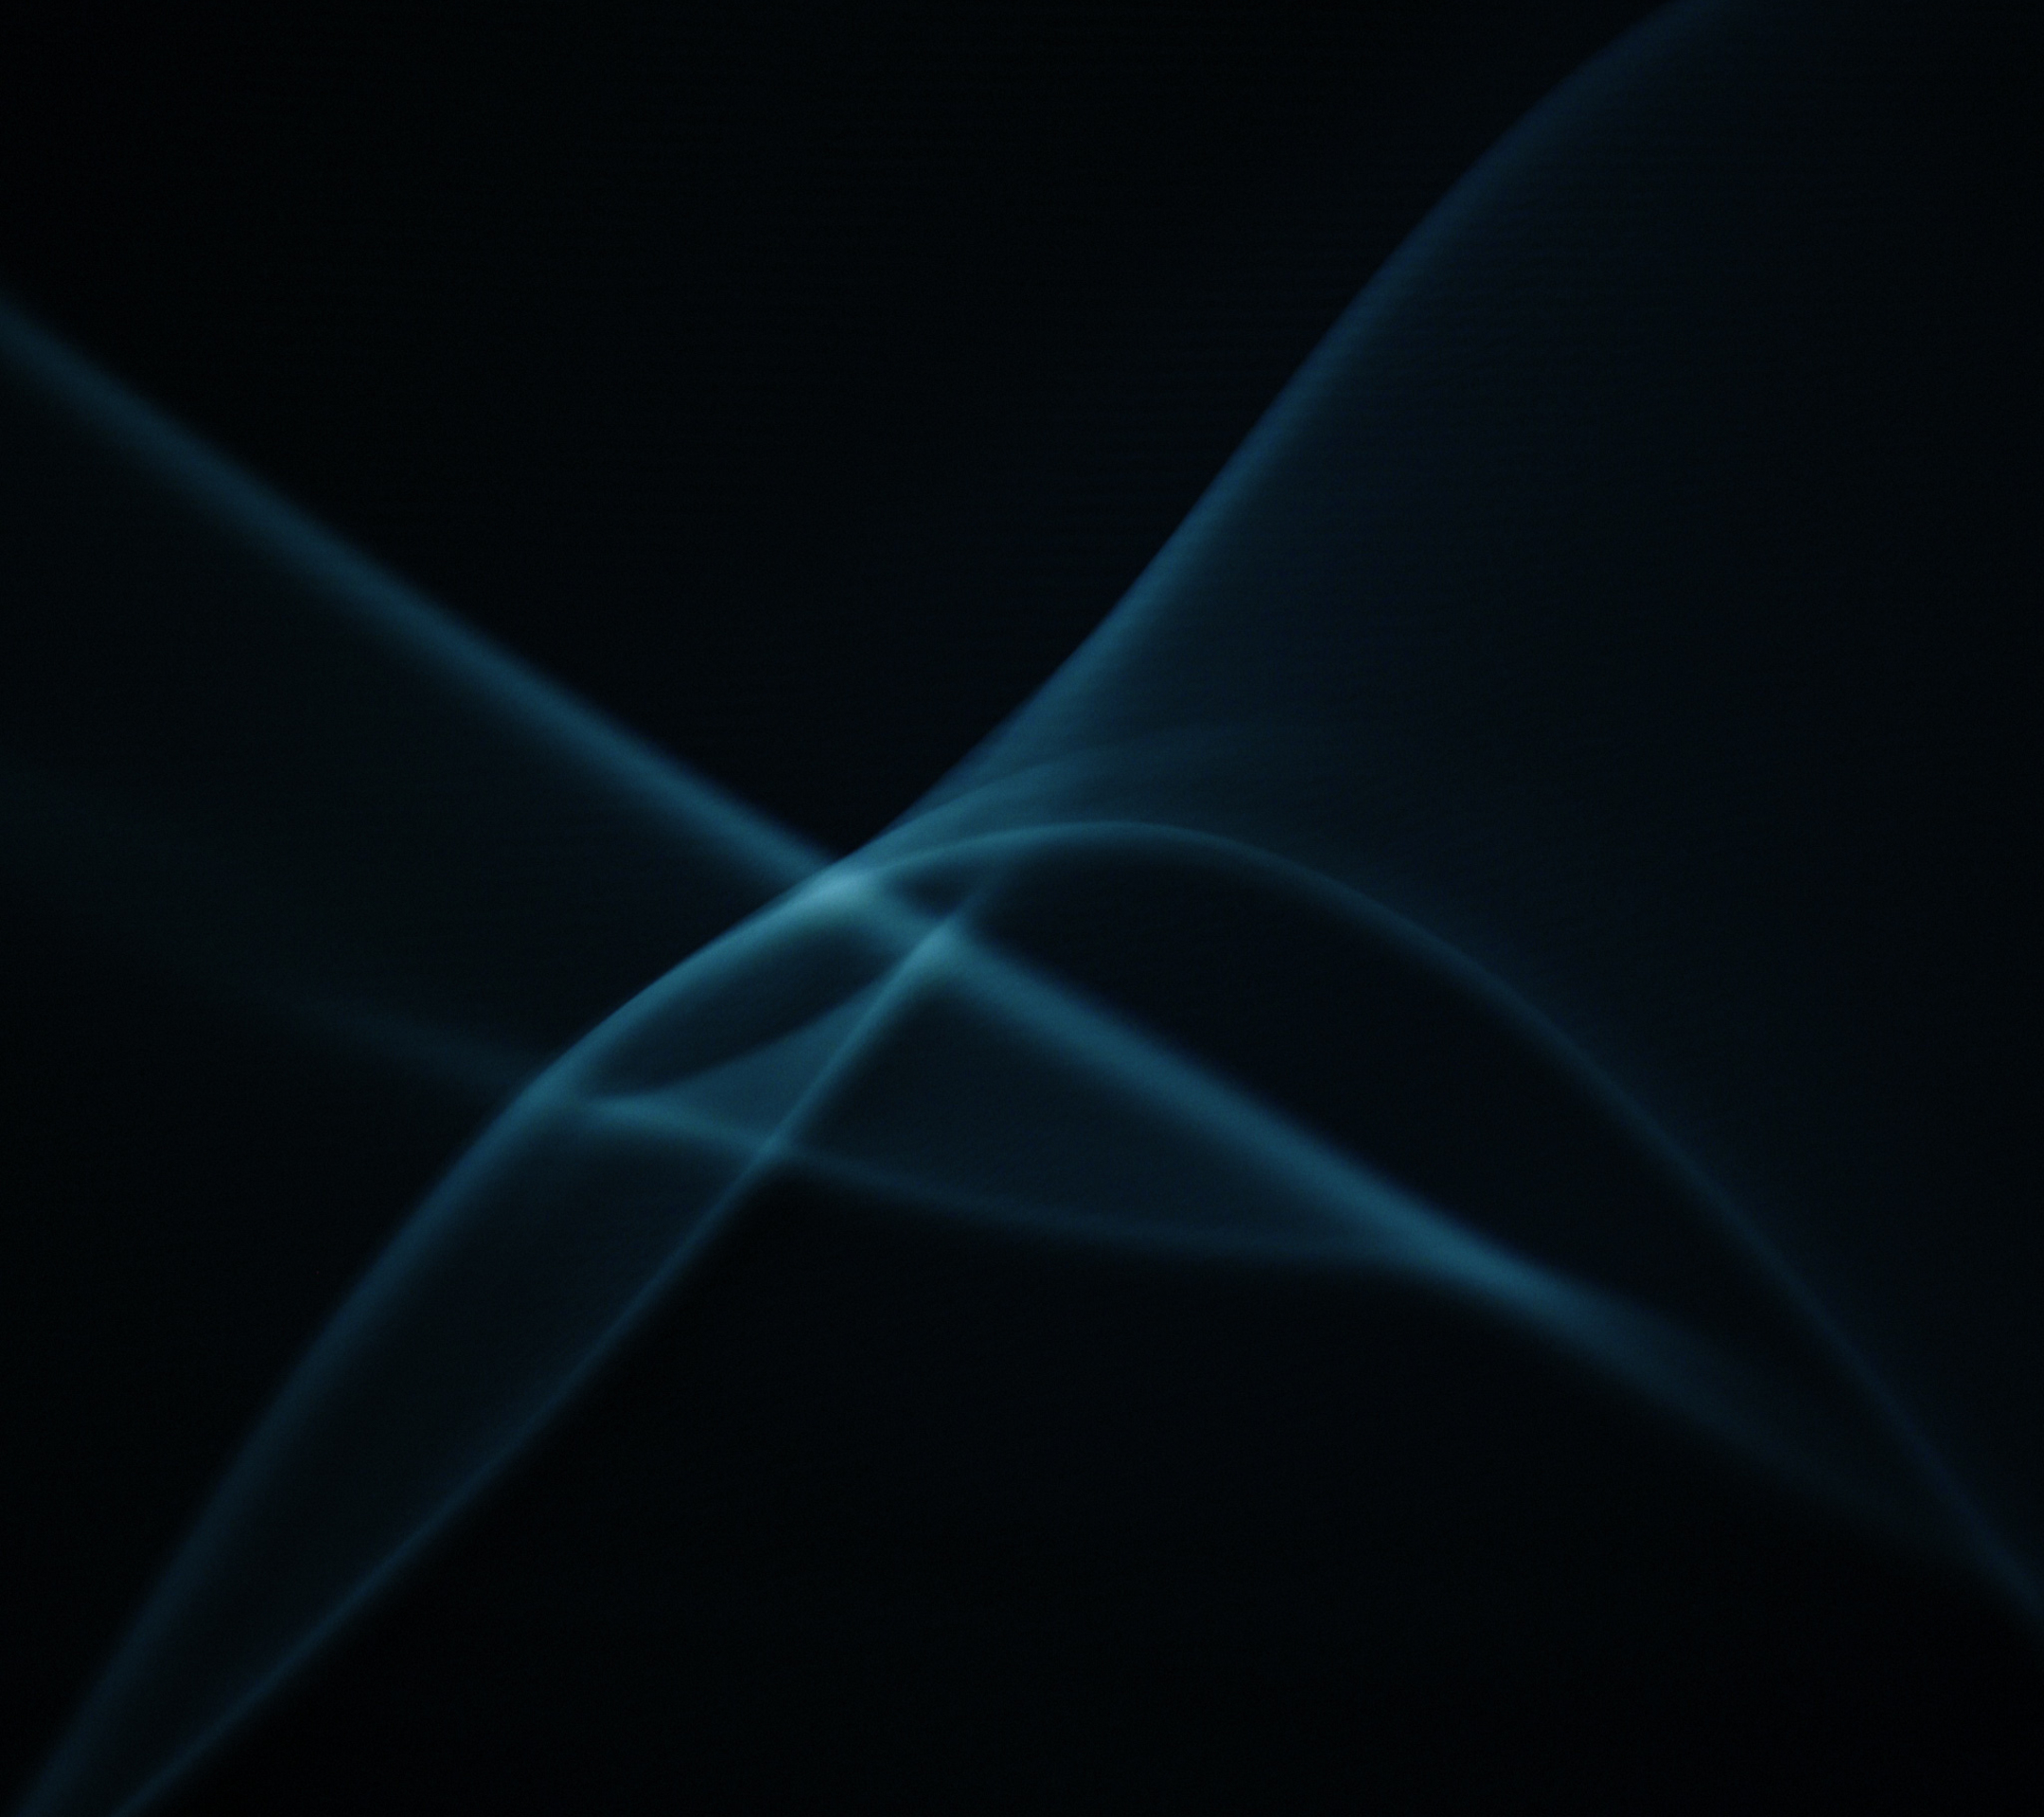 Sony Xperia Wallpaper Hd For Mobile